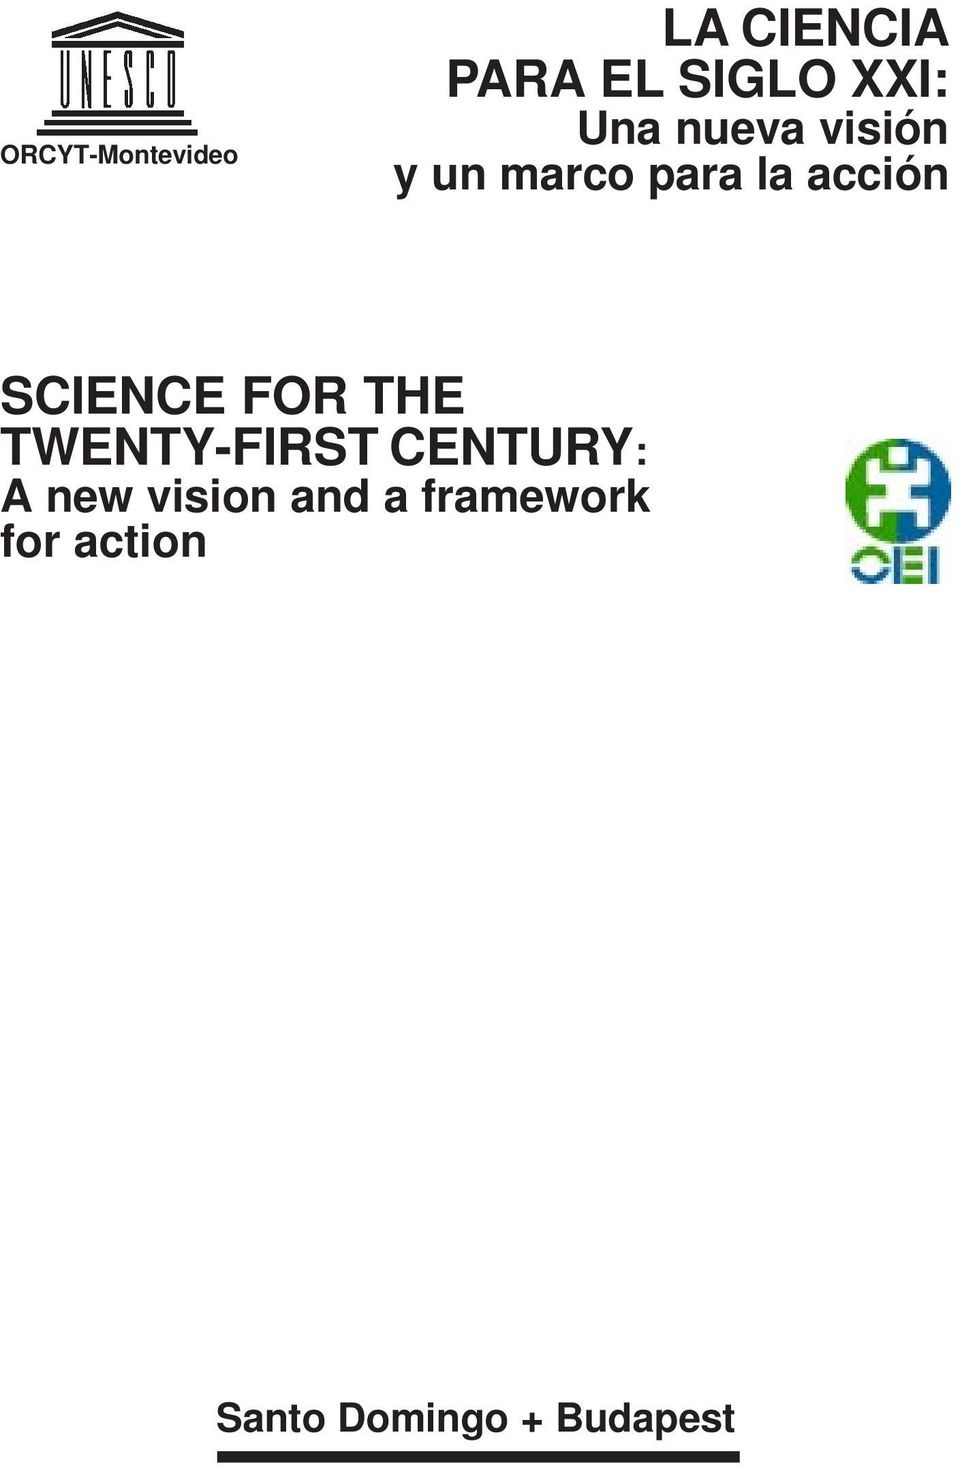 SCIENCE FOR THE TWENTY-FIRST CENTURY: A new